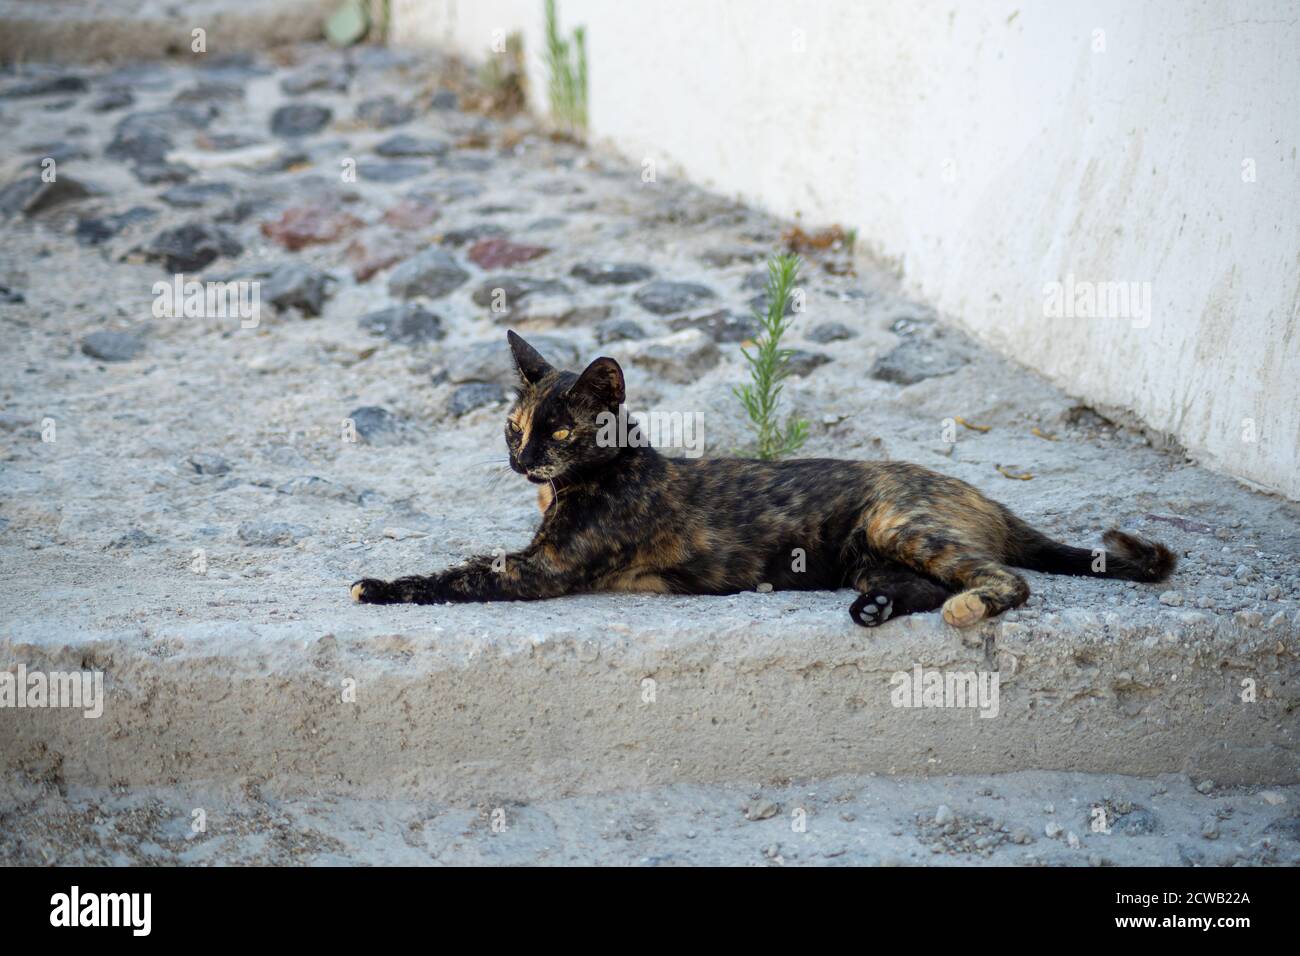 Gold and black cat with yellow eyes lying on a stone floor Stock Photo